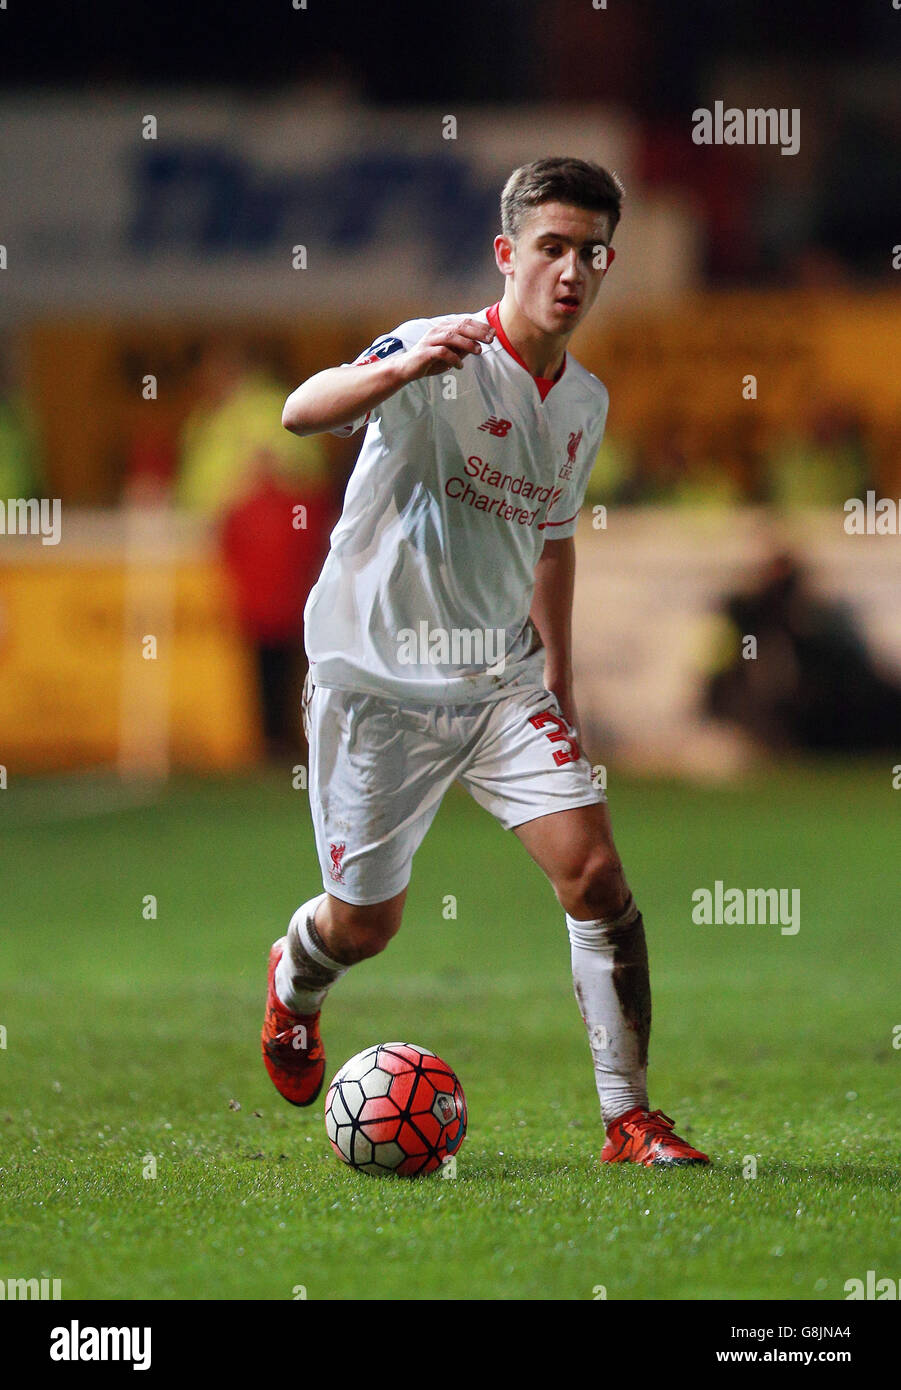 Exeter City v Liverpool - Emirates FA Cup - Third Round - St James Park. Liverpool's Cameron Brannagan during the Emirates FA Cup, third round match at St James Park, Exeter. Stock Photo